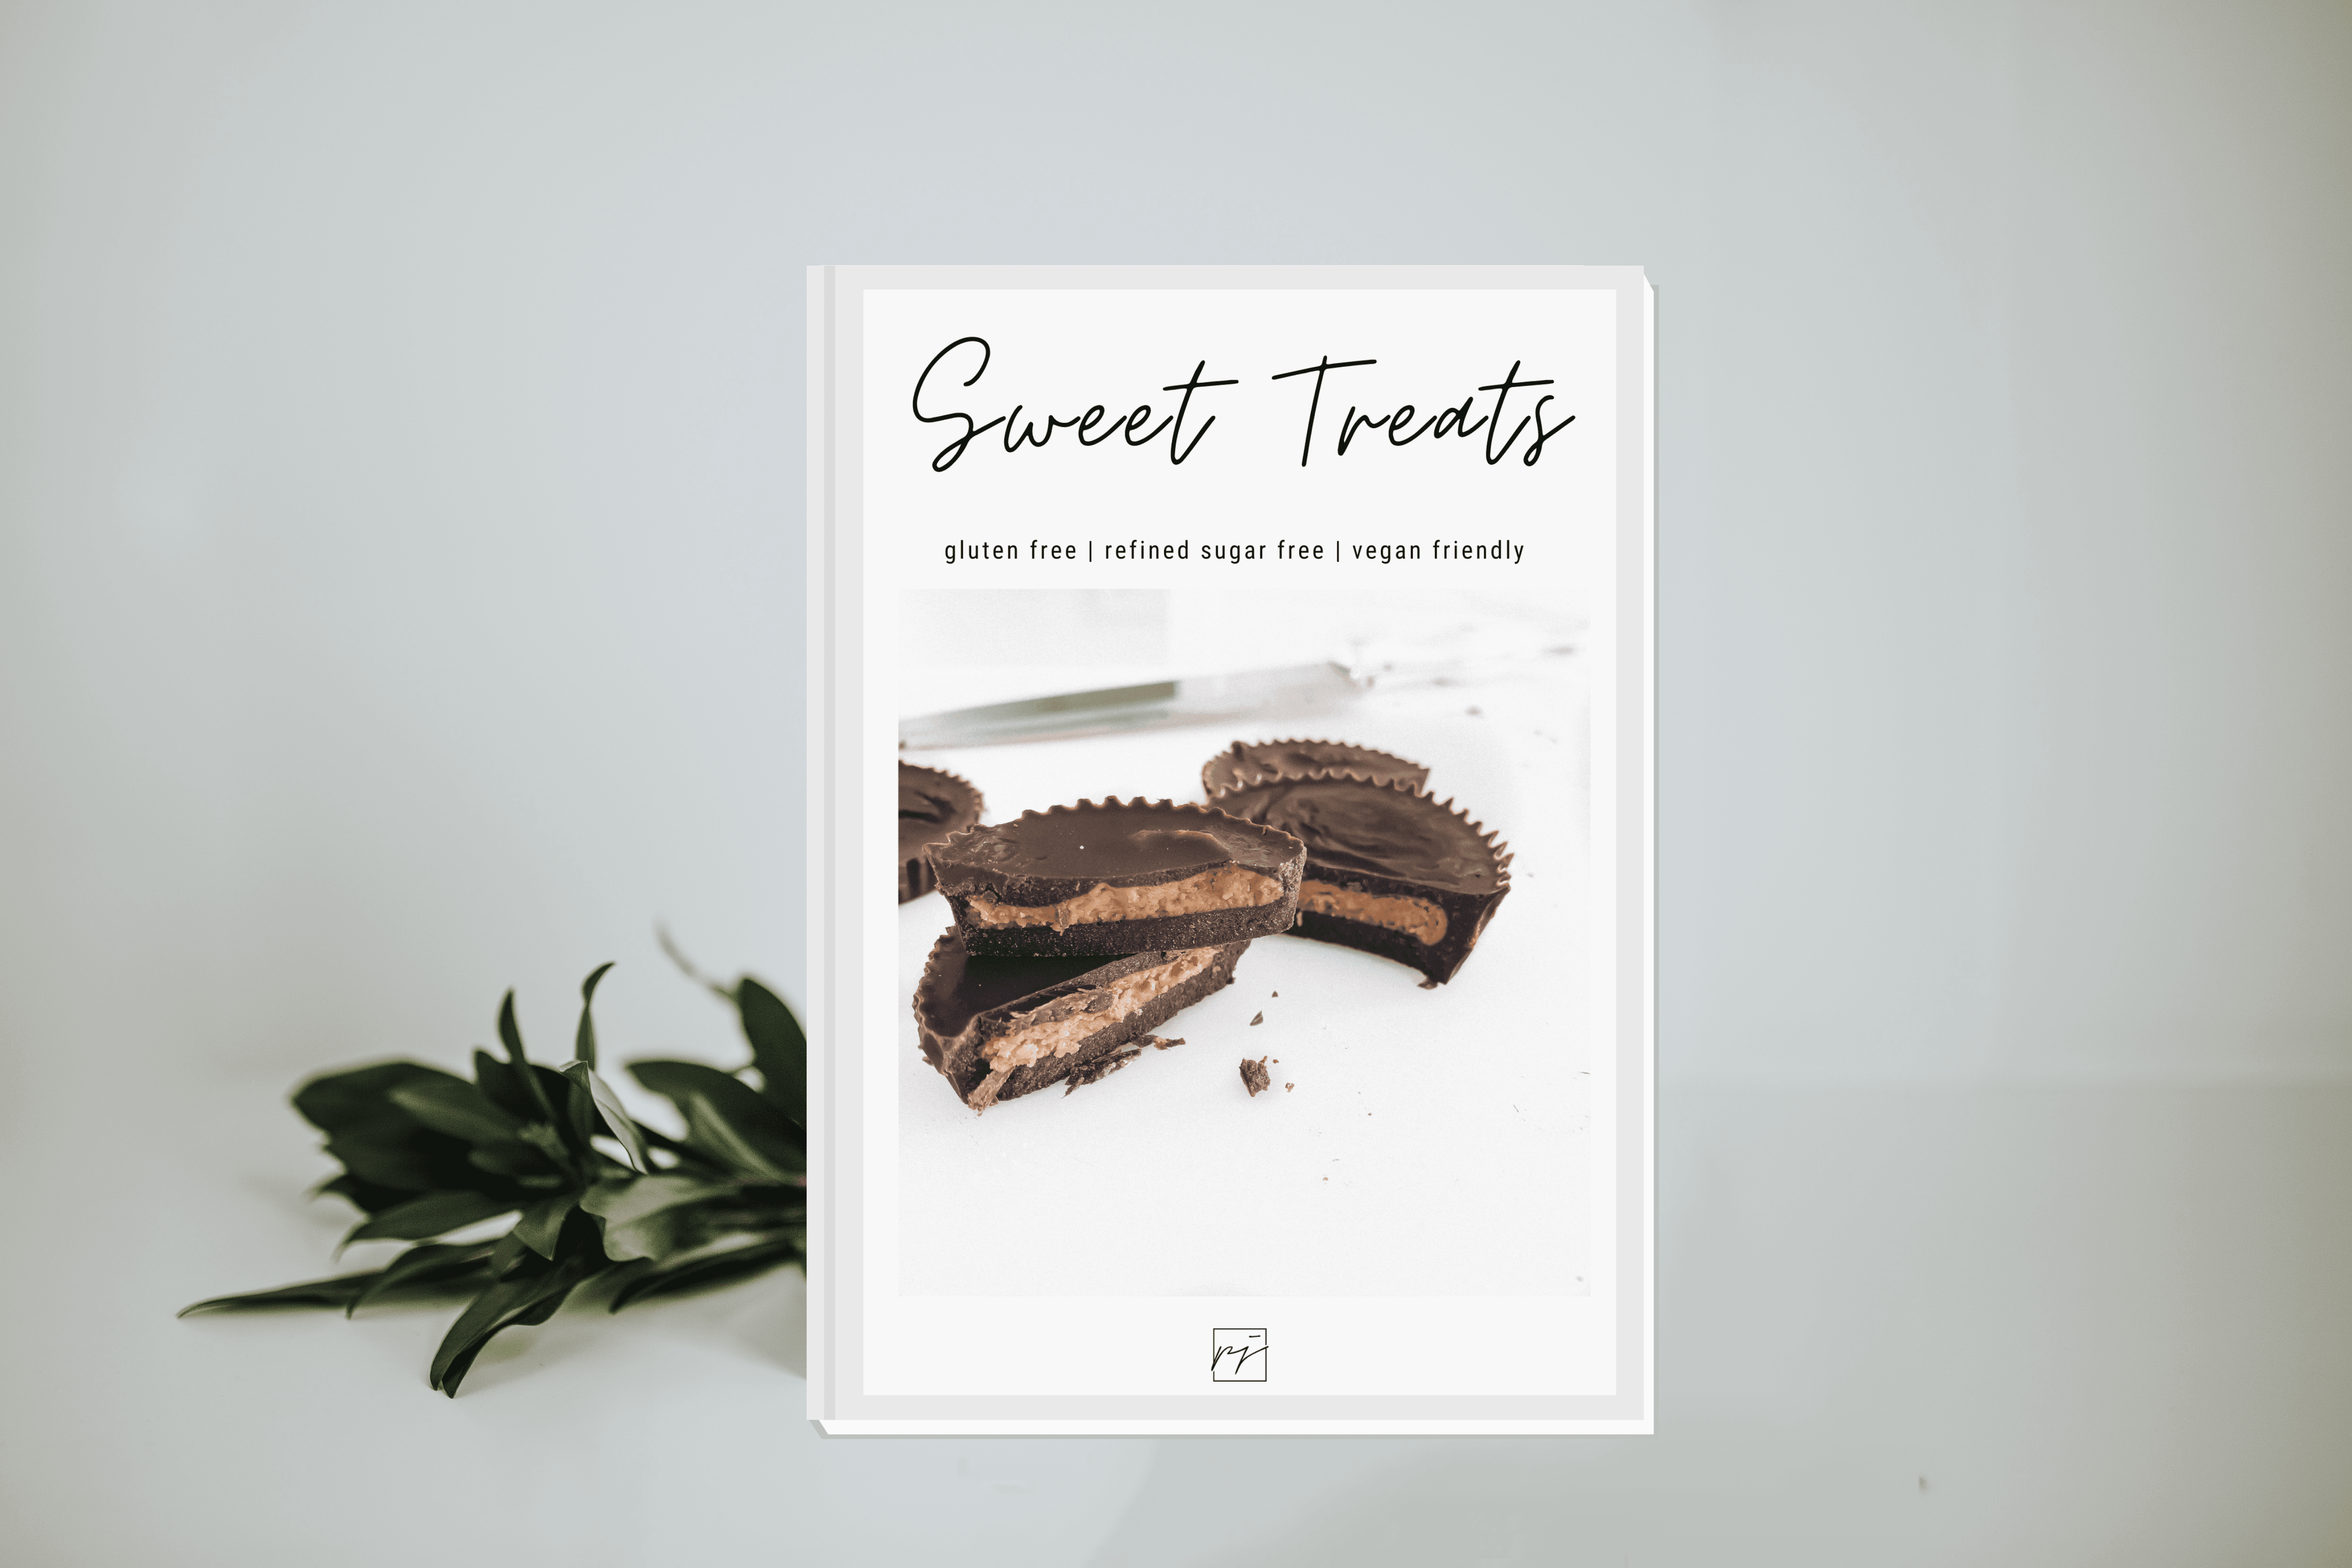 Sweet Treats E-Cookbook, gluten free, refined sugar free, vegan friendly. Chocolate peanut butter cups on a white backdrop with green foliage - lifewithPandJ